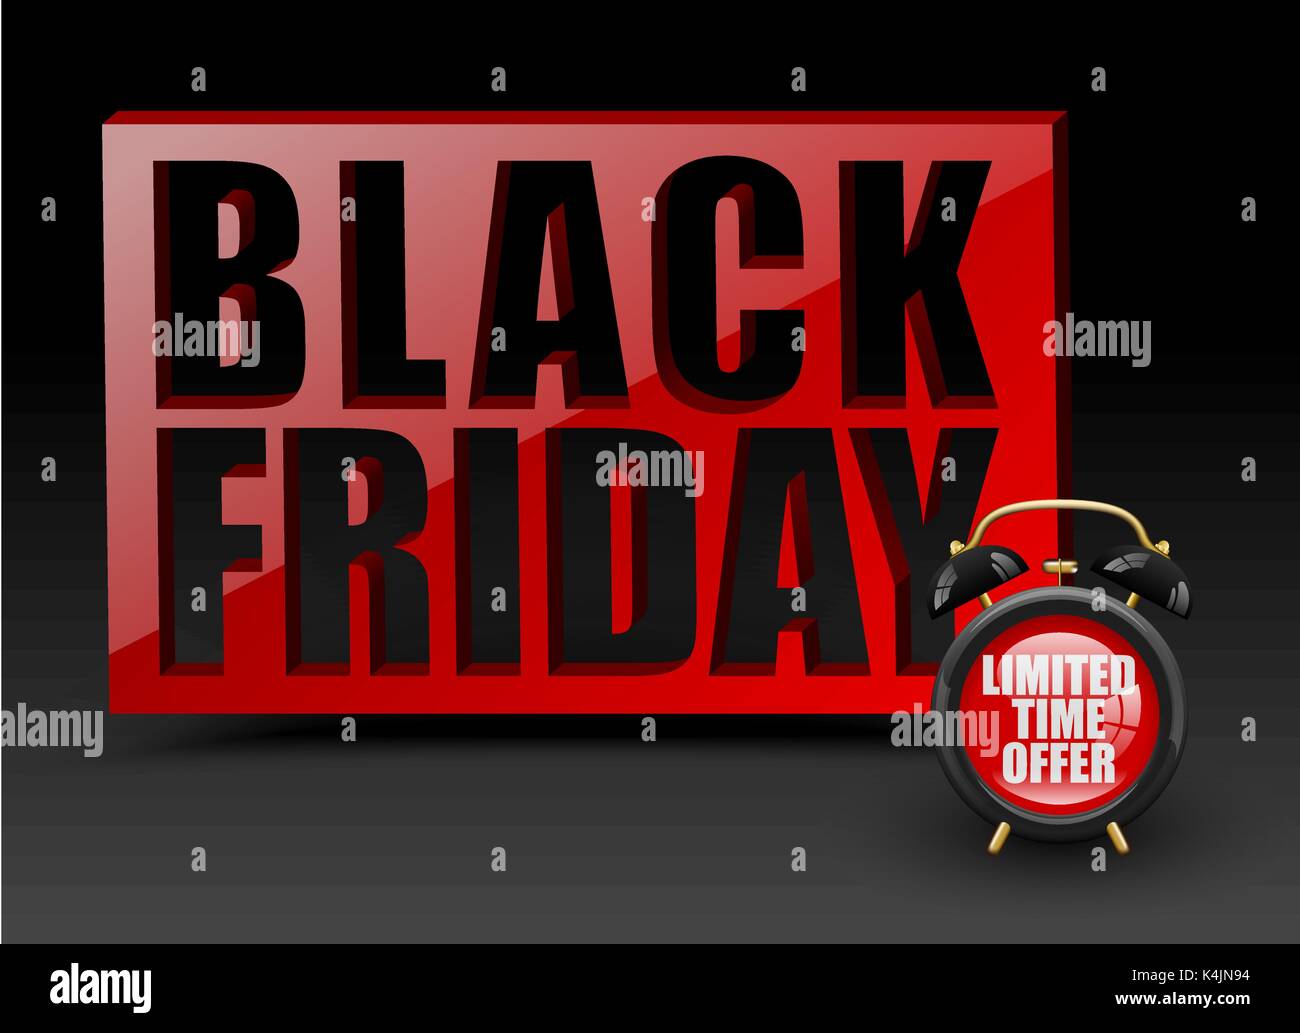 Black friday red wall on black background. Vector alarm clock with limited time offer text. Banner for holiday sale promotion. Stock Vector